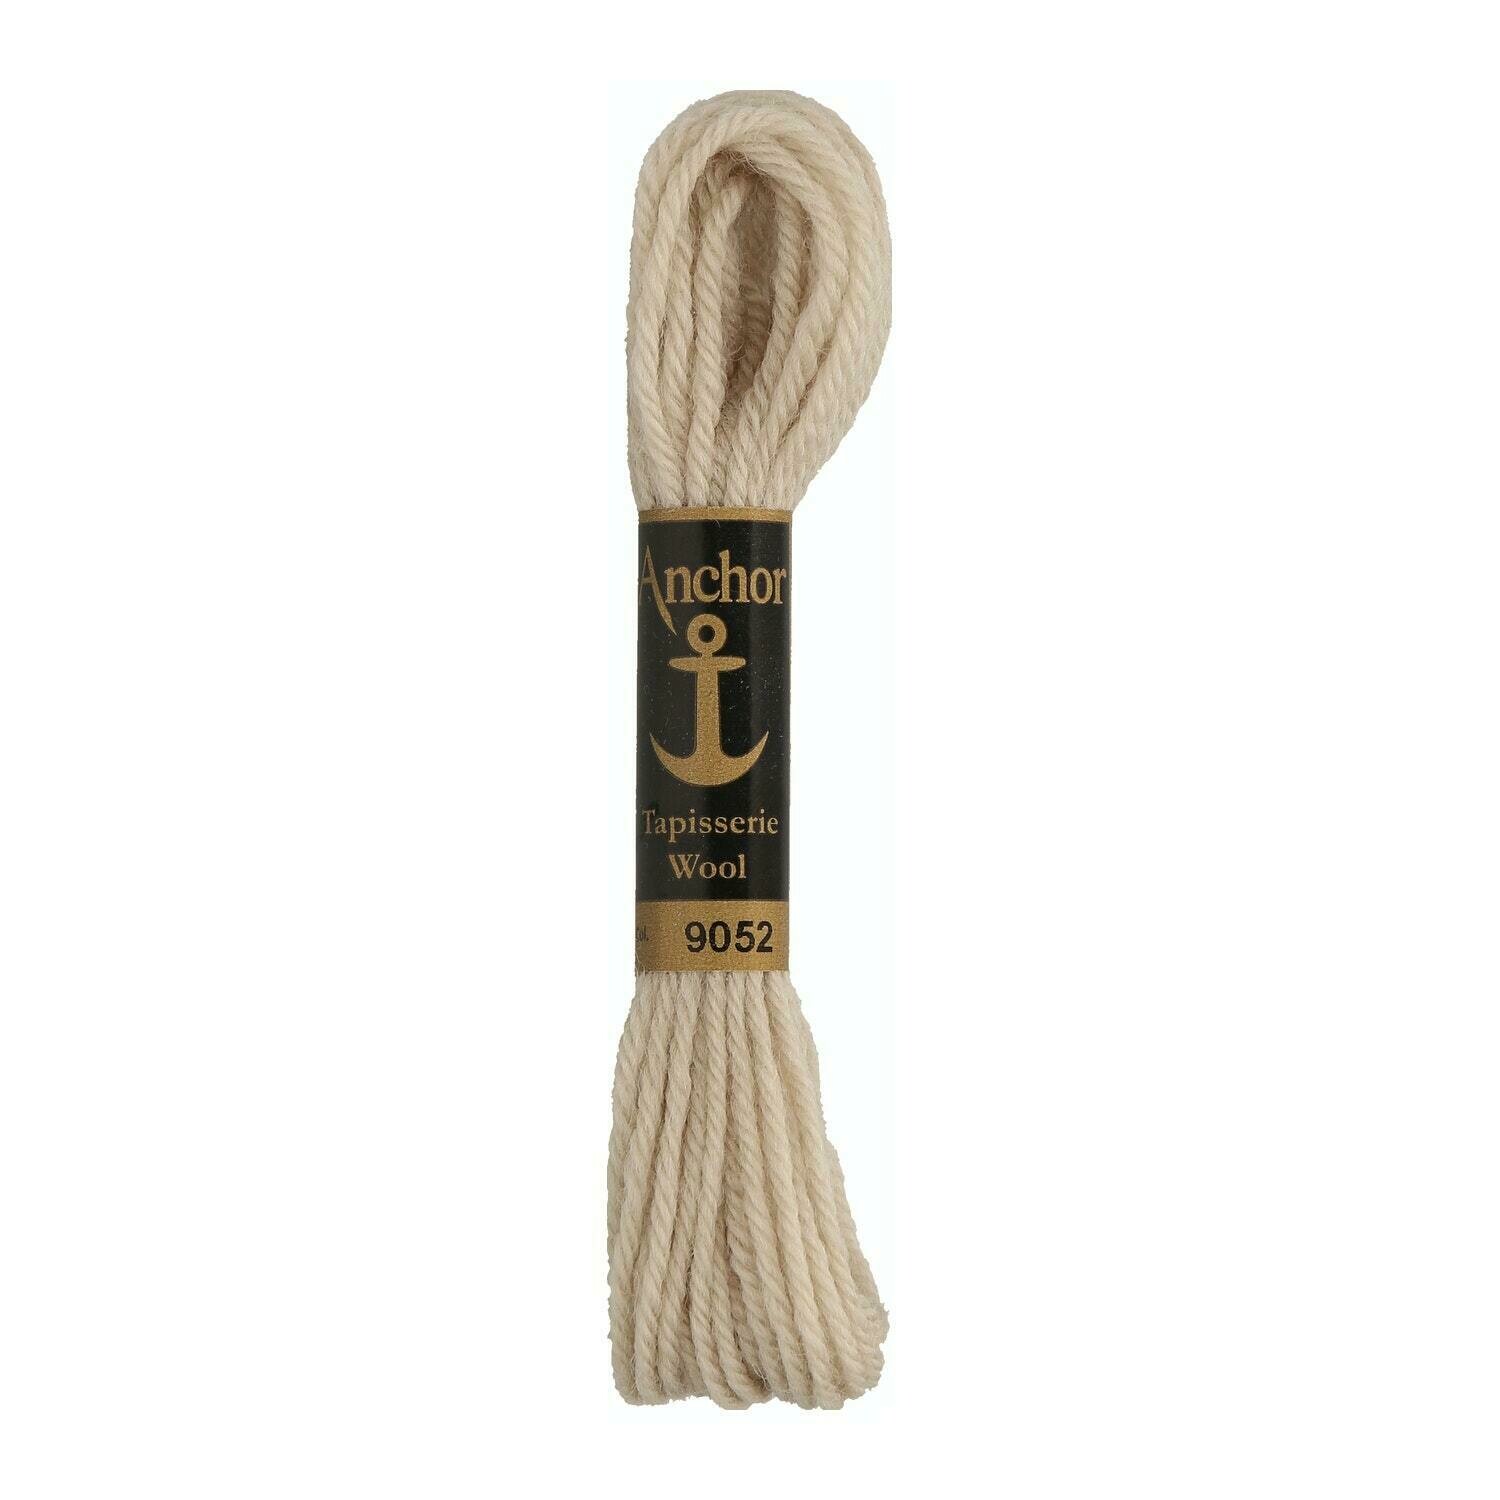 Anchor Tapisserie Wool #09052